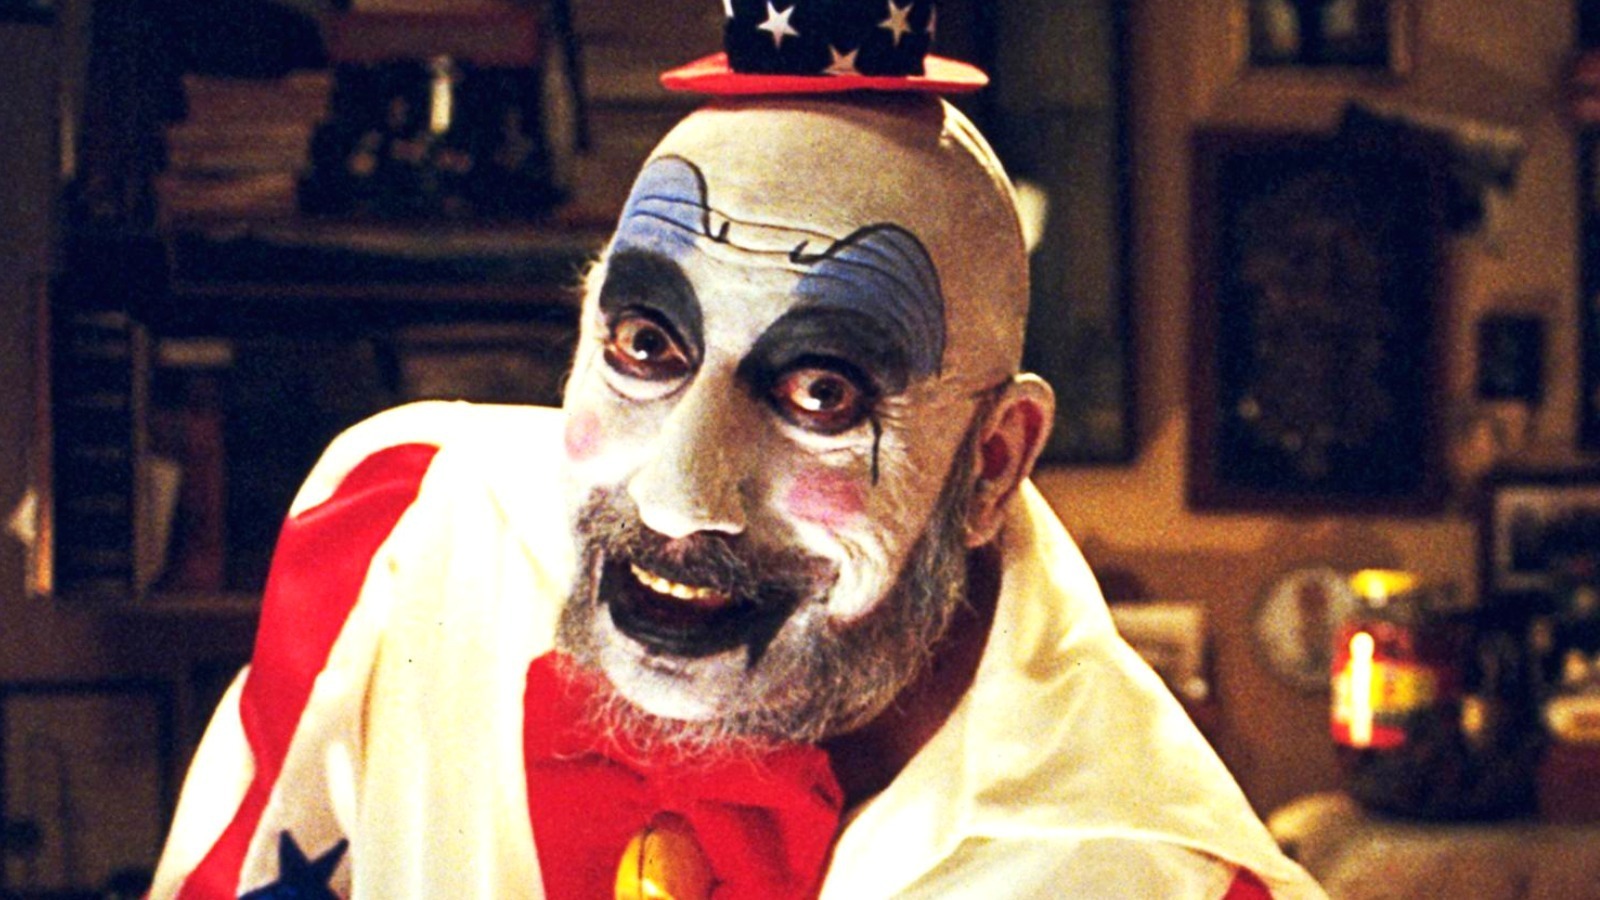 The House Of 1000 Corpses Scene Horror Fans Can't Stop Rewatching